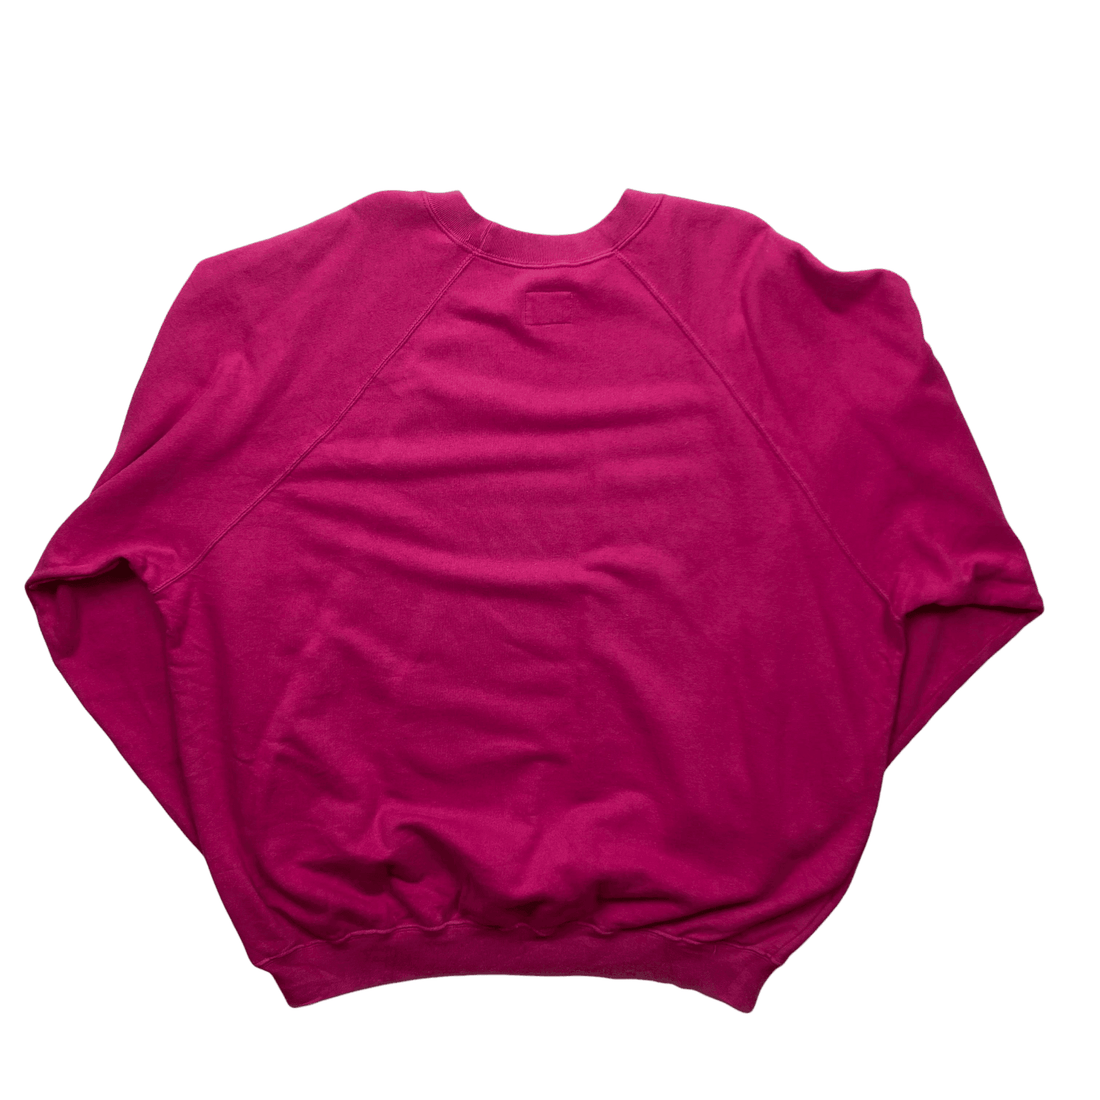 Vintage 90s Pink United Colours of Benetton Spell-Out Sweatshirt - Extra Large - The Streetwear Studio